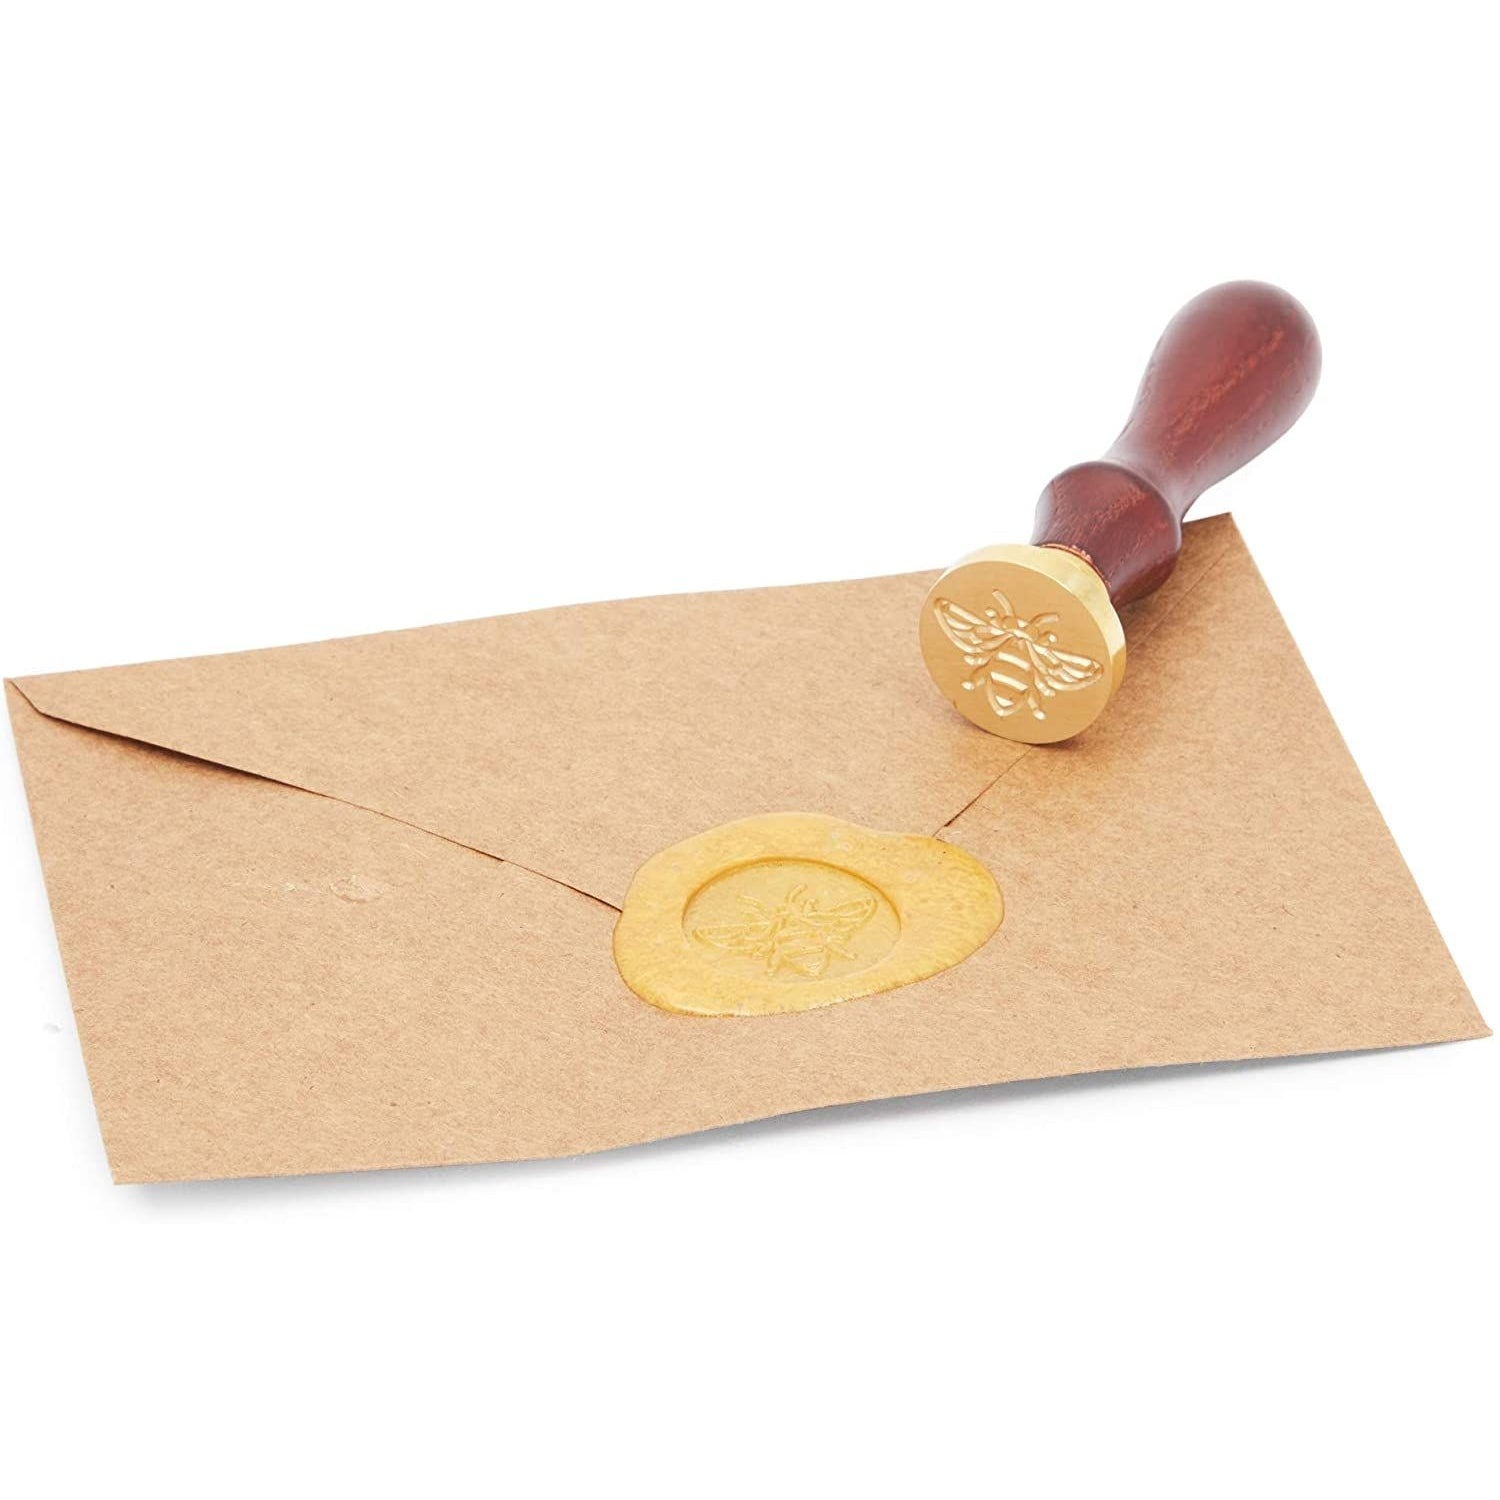 Bright Creations 4 Piece Rose Wax Seal Stamp Kit for Wedding Invitations,  Envelopes, Office Stationery